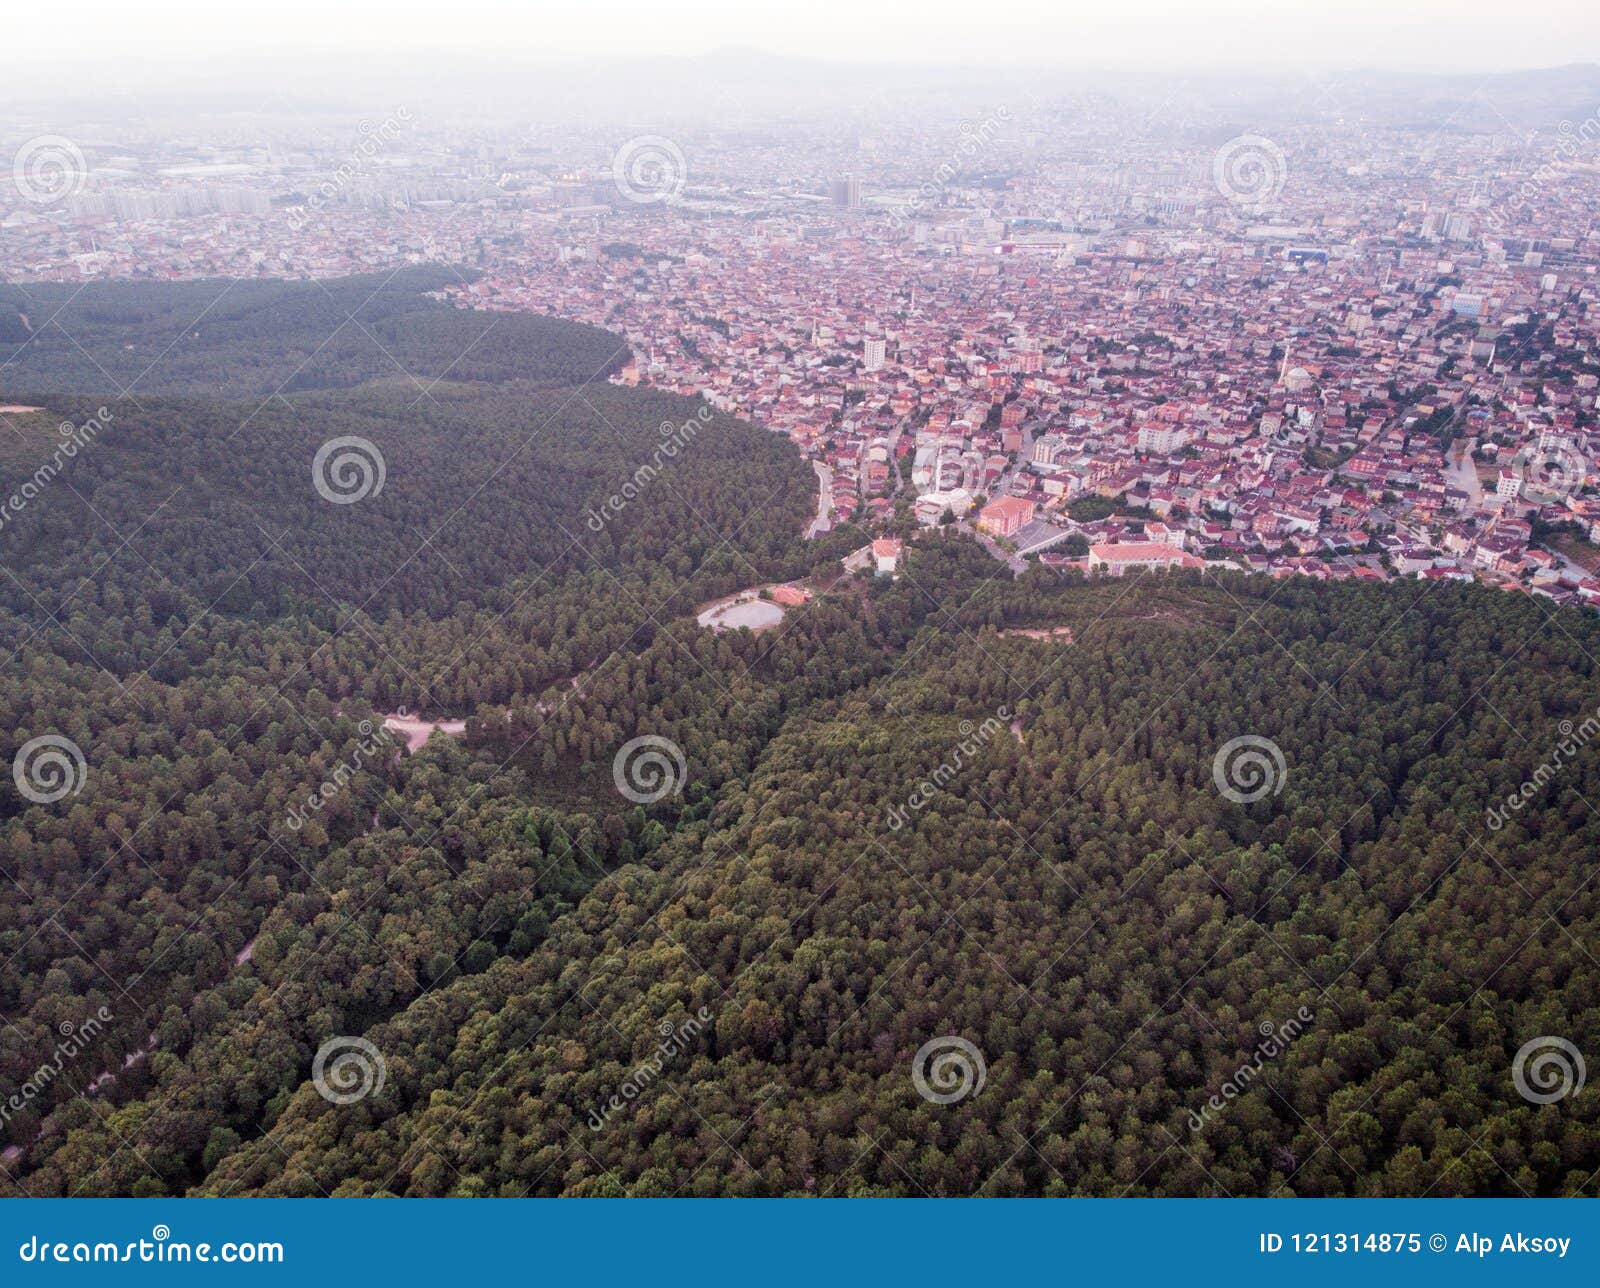 aerial drone view of istanbul sultanbeyli region / forest and city